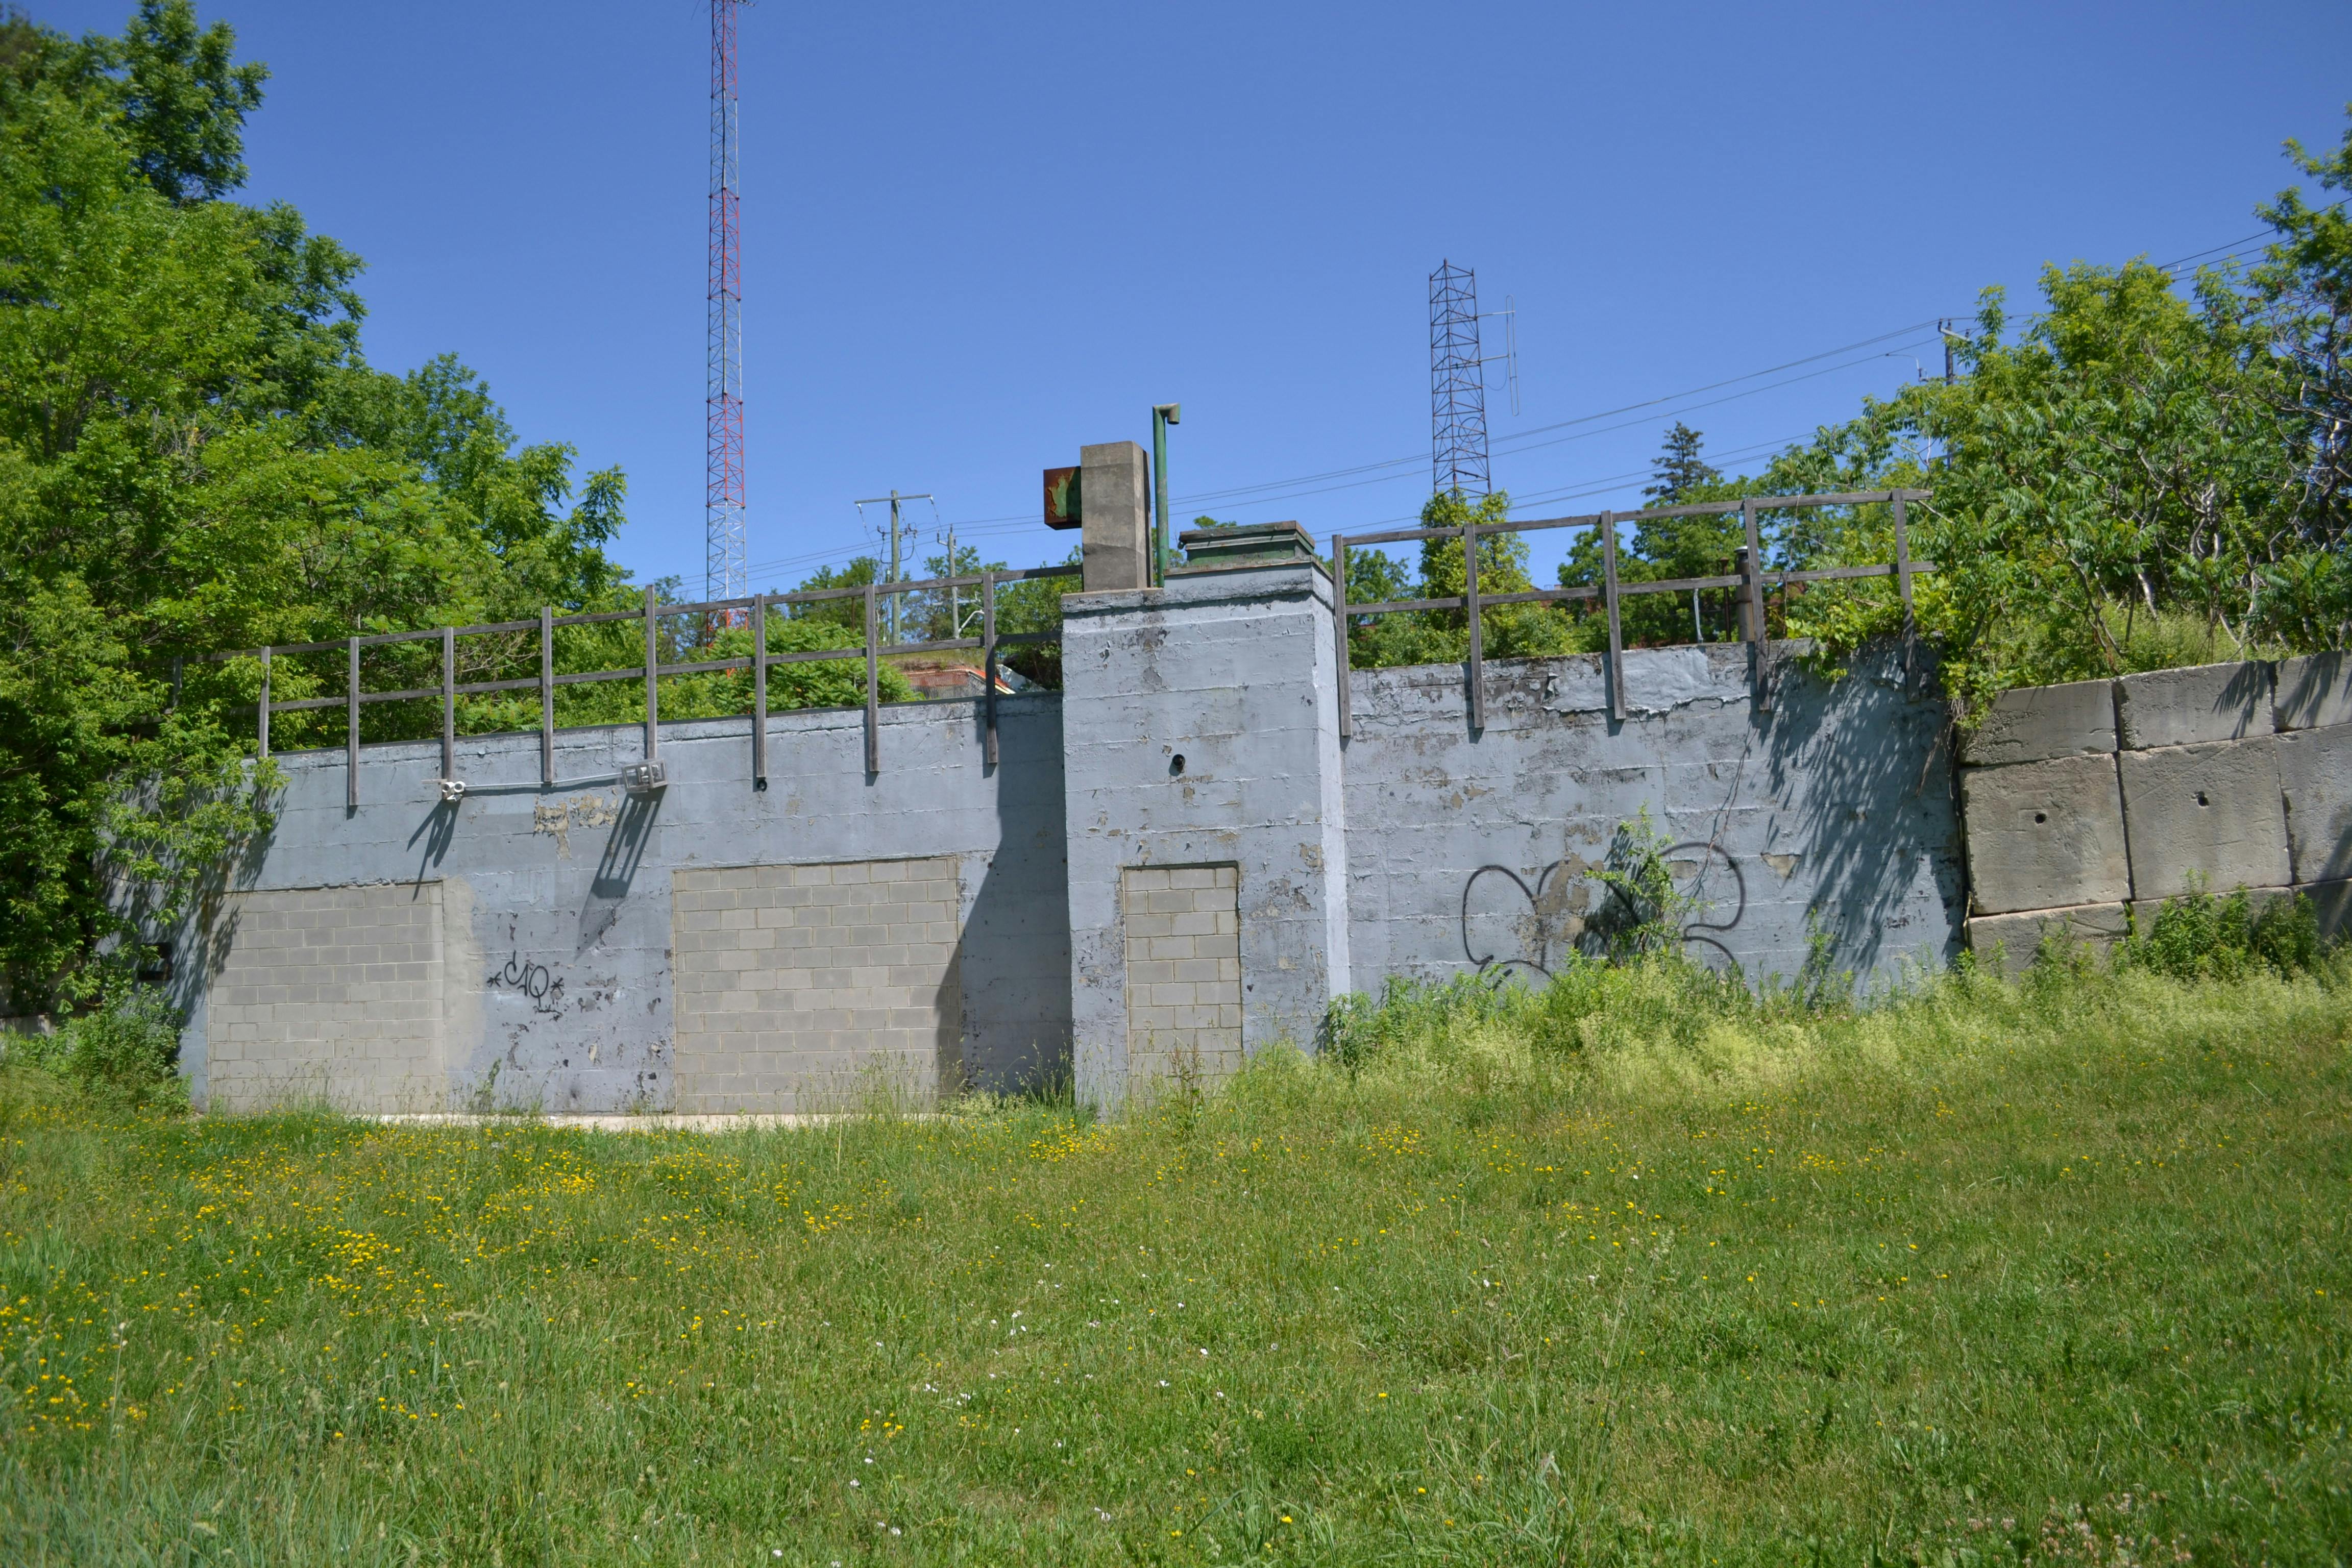 Rear, southern elevation of the concrete MEGHQ bunker